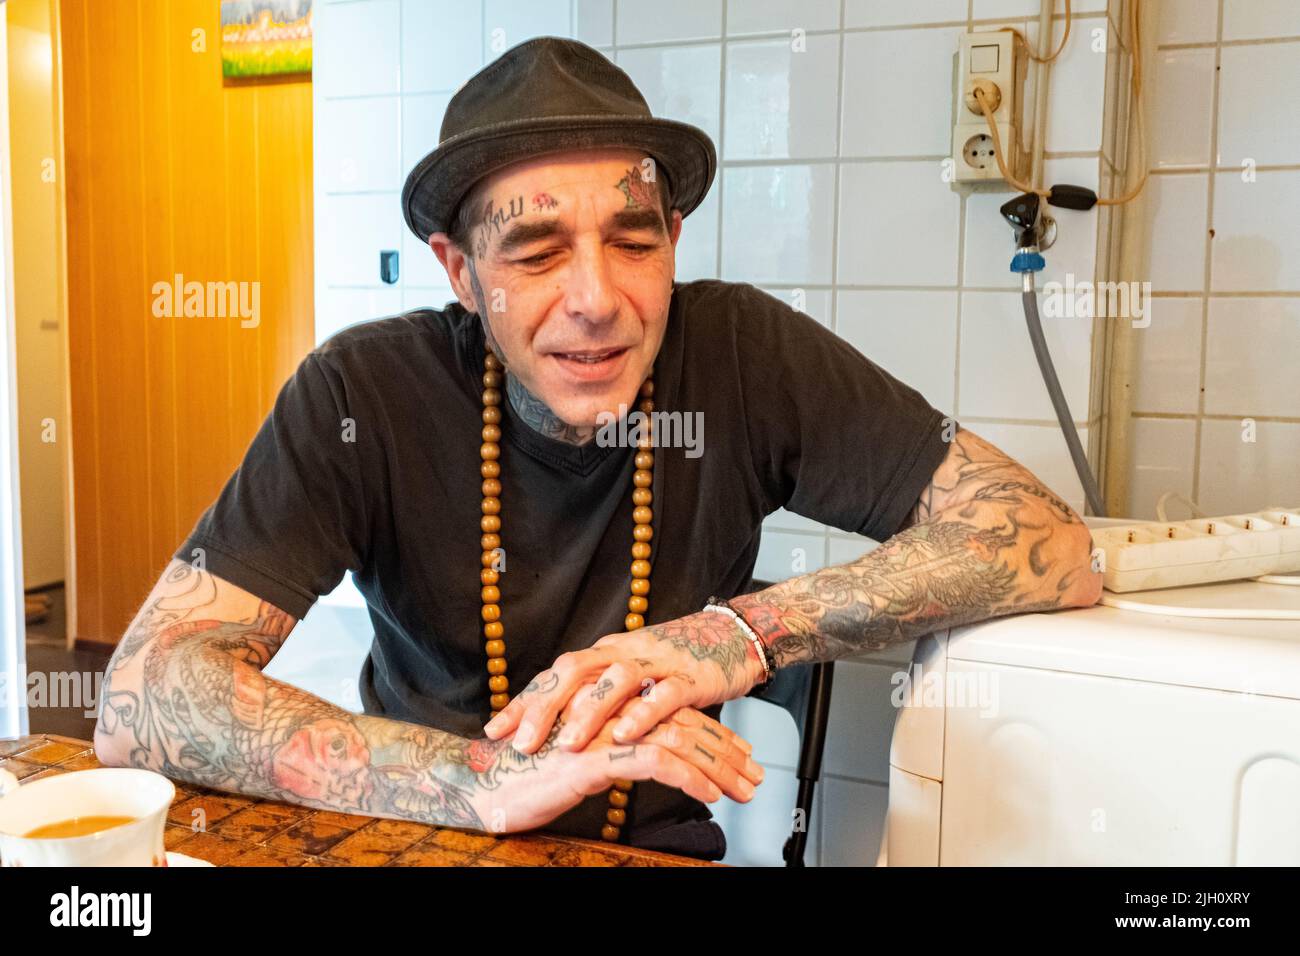 Tilburg, Netherlands. Portrait of a middle aged man with an abundance of tattoos having tea inside his vintage kitchen. Stock Photo